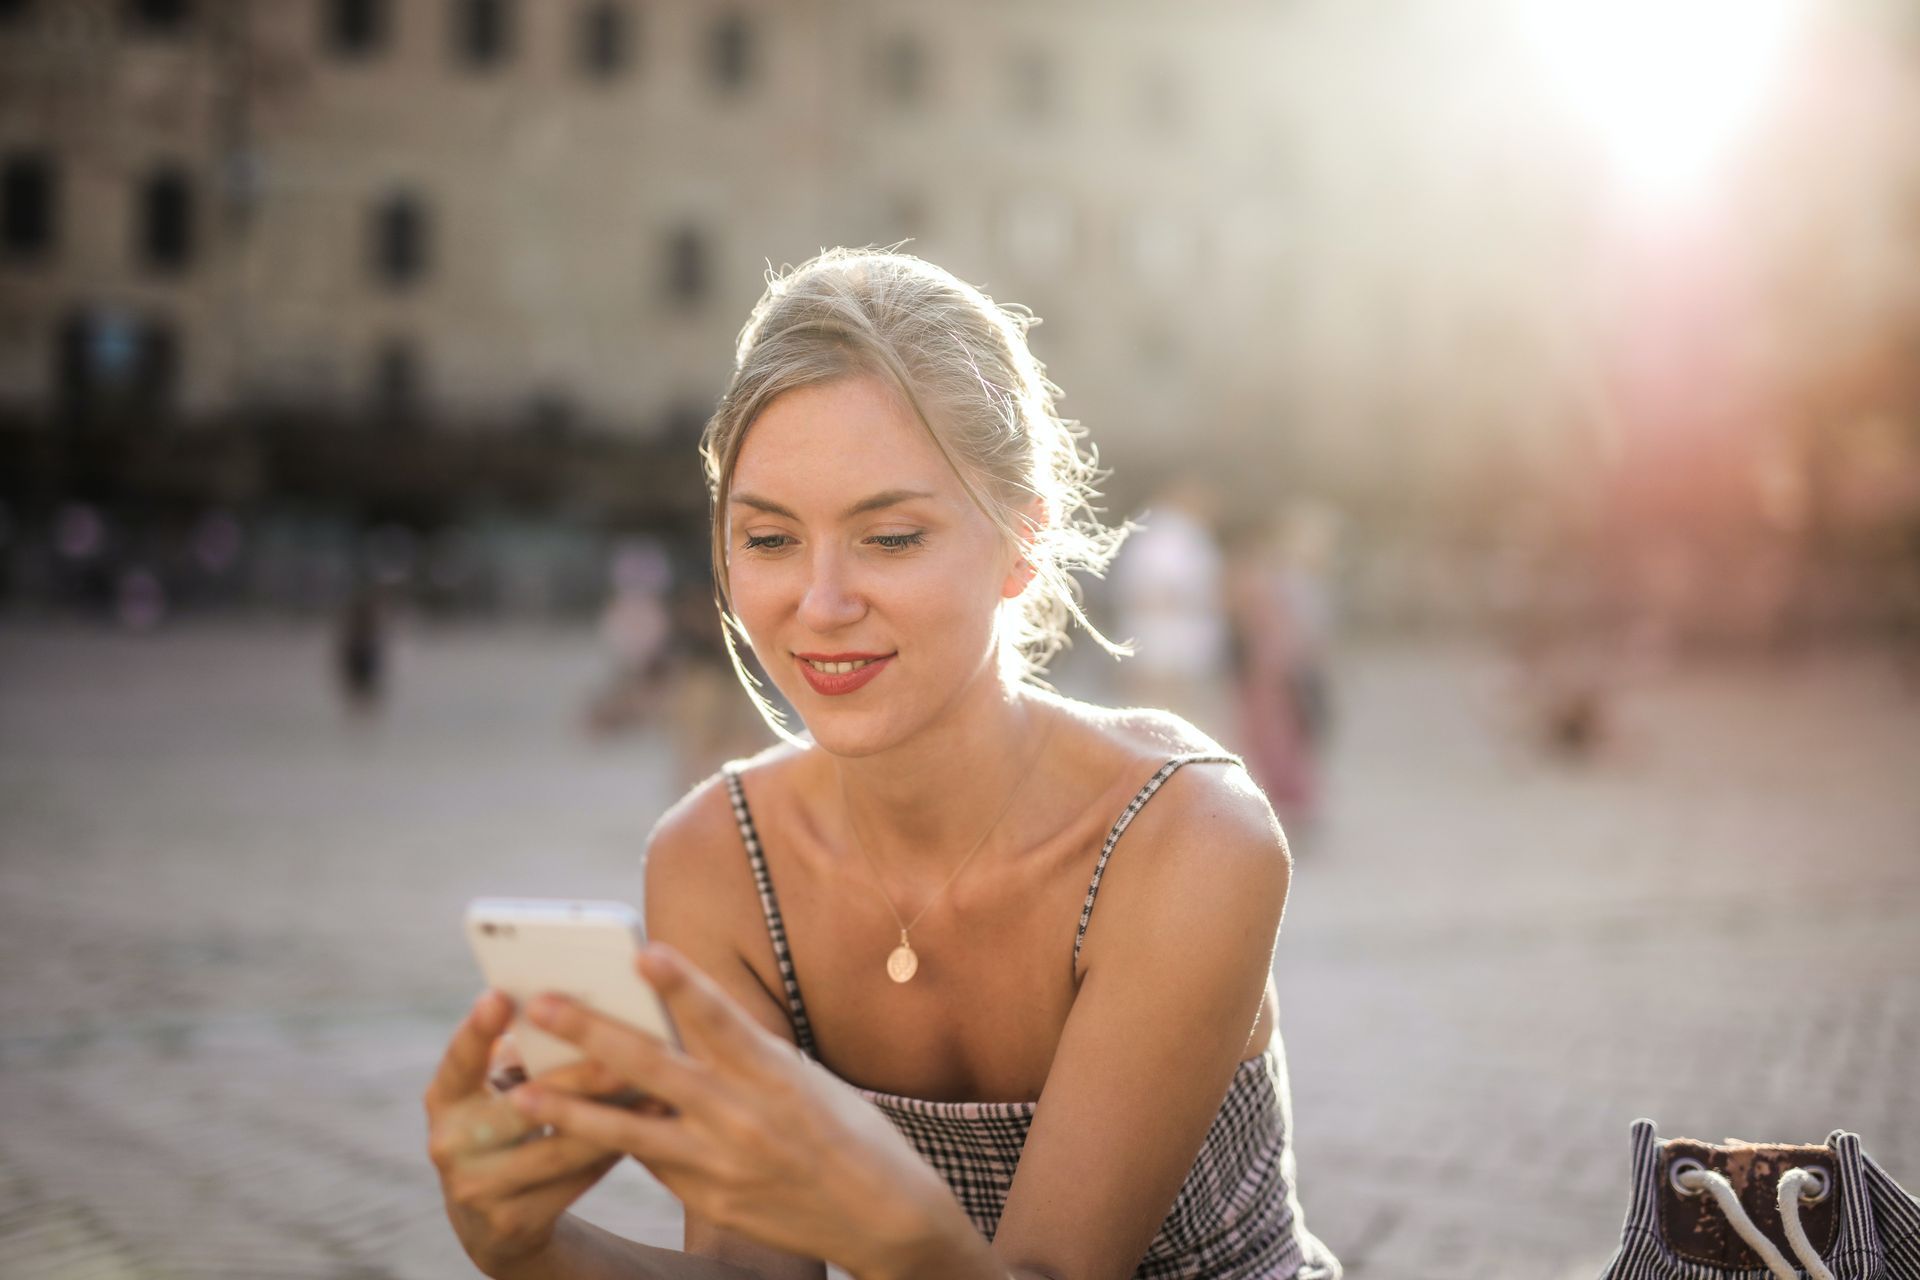 young blonde woman on cell phone in city center